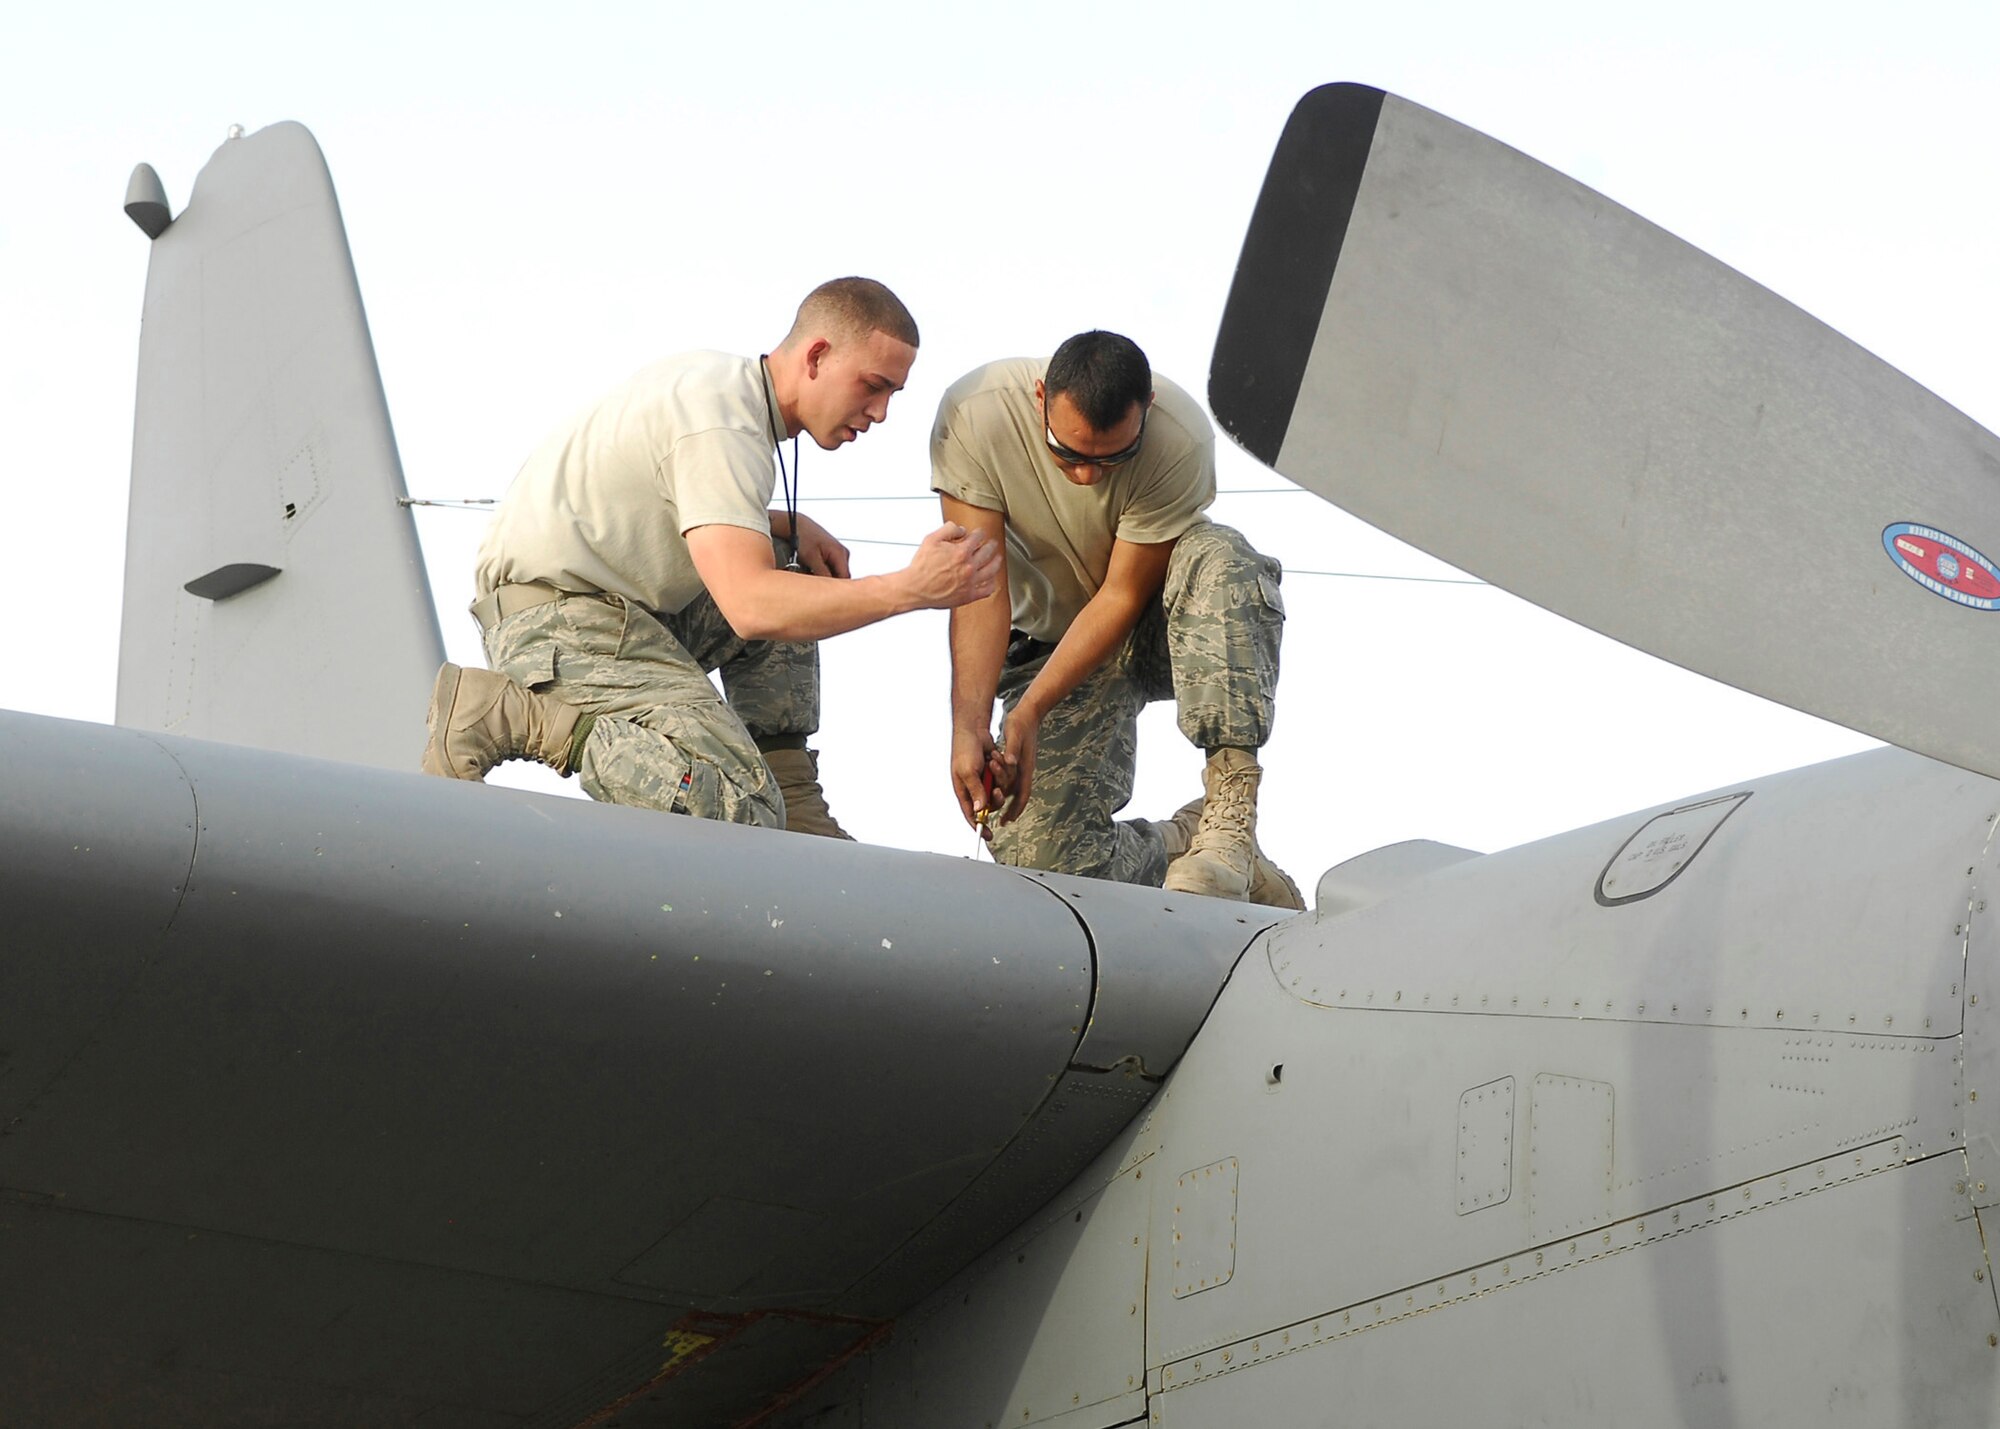 BAGRAM AIR FIELD, Afghanistan - Technical Sergeant Jose Rodriguez (right) assists Staff Sgt. Andres Jaramillo in securing bolts during a function check on the  EC-130 Compass Call. Both are members of the 41st Expeditionary Aircraft Maintenance Unit and are deployed out of Davis-Monthan Air Force Base, Ariz. (U.S. Air Force photo/Senior Airman Felicia Juenke)